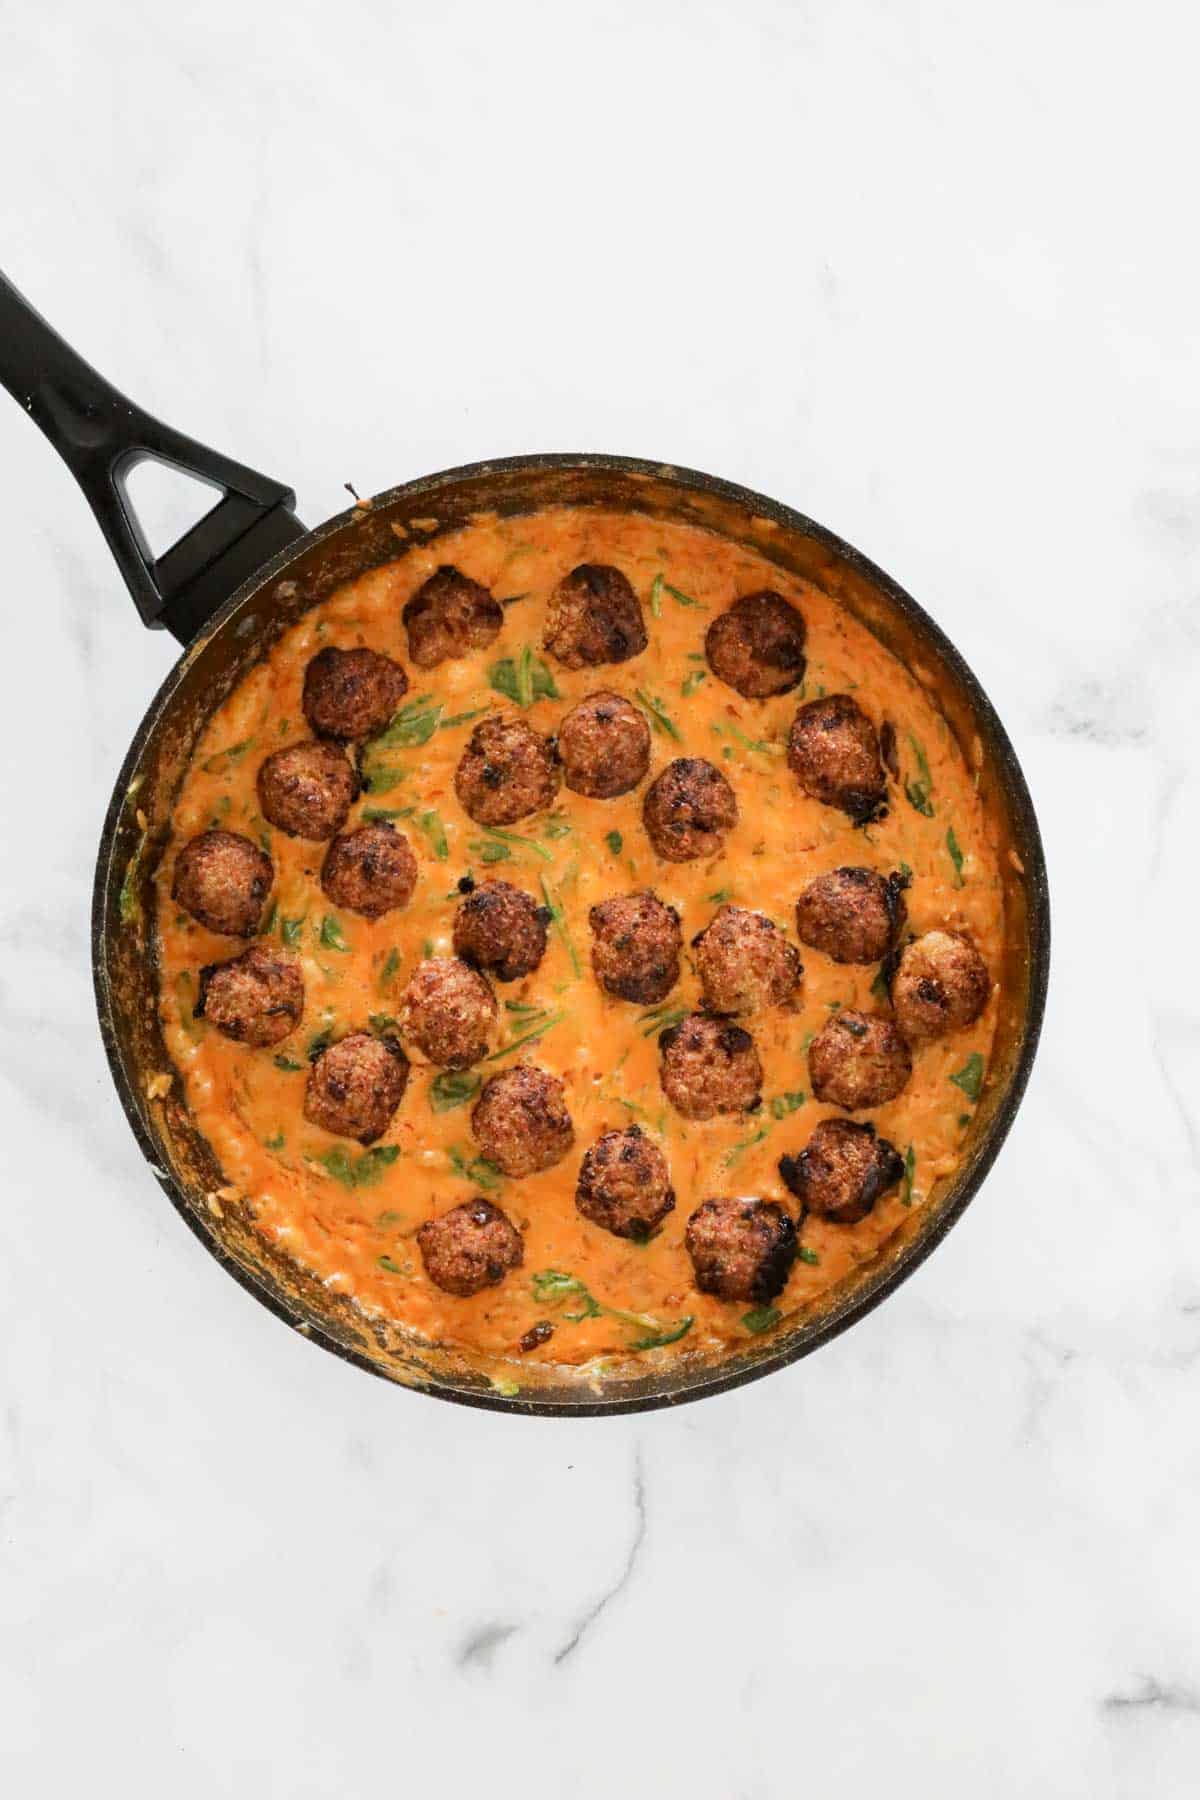 The baked pork meatballs added to the pan of creamy tomato risoni.